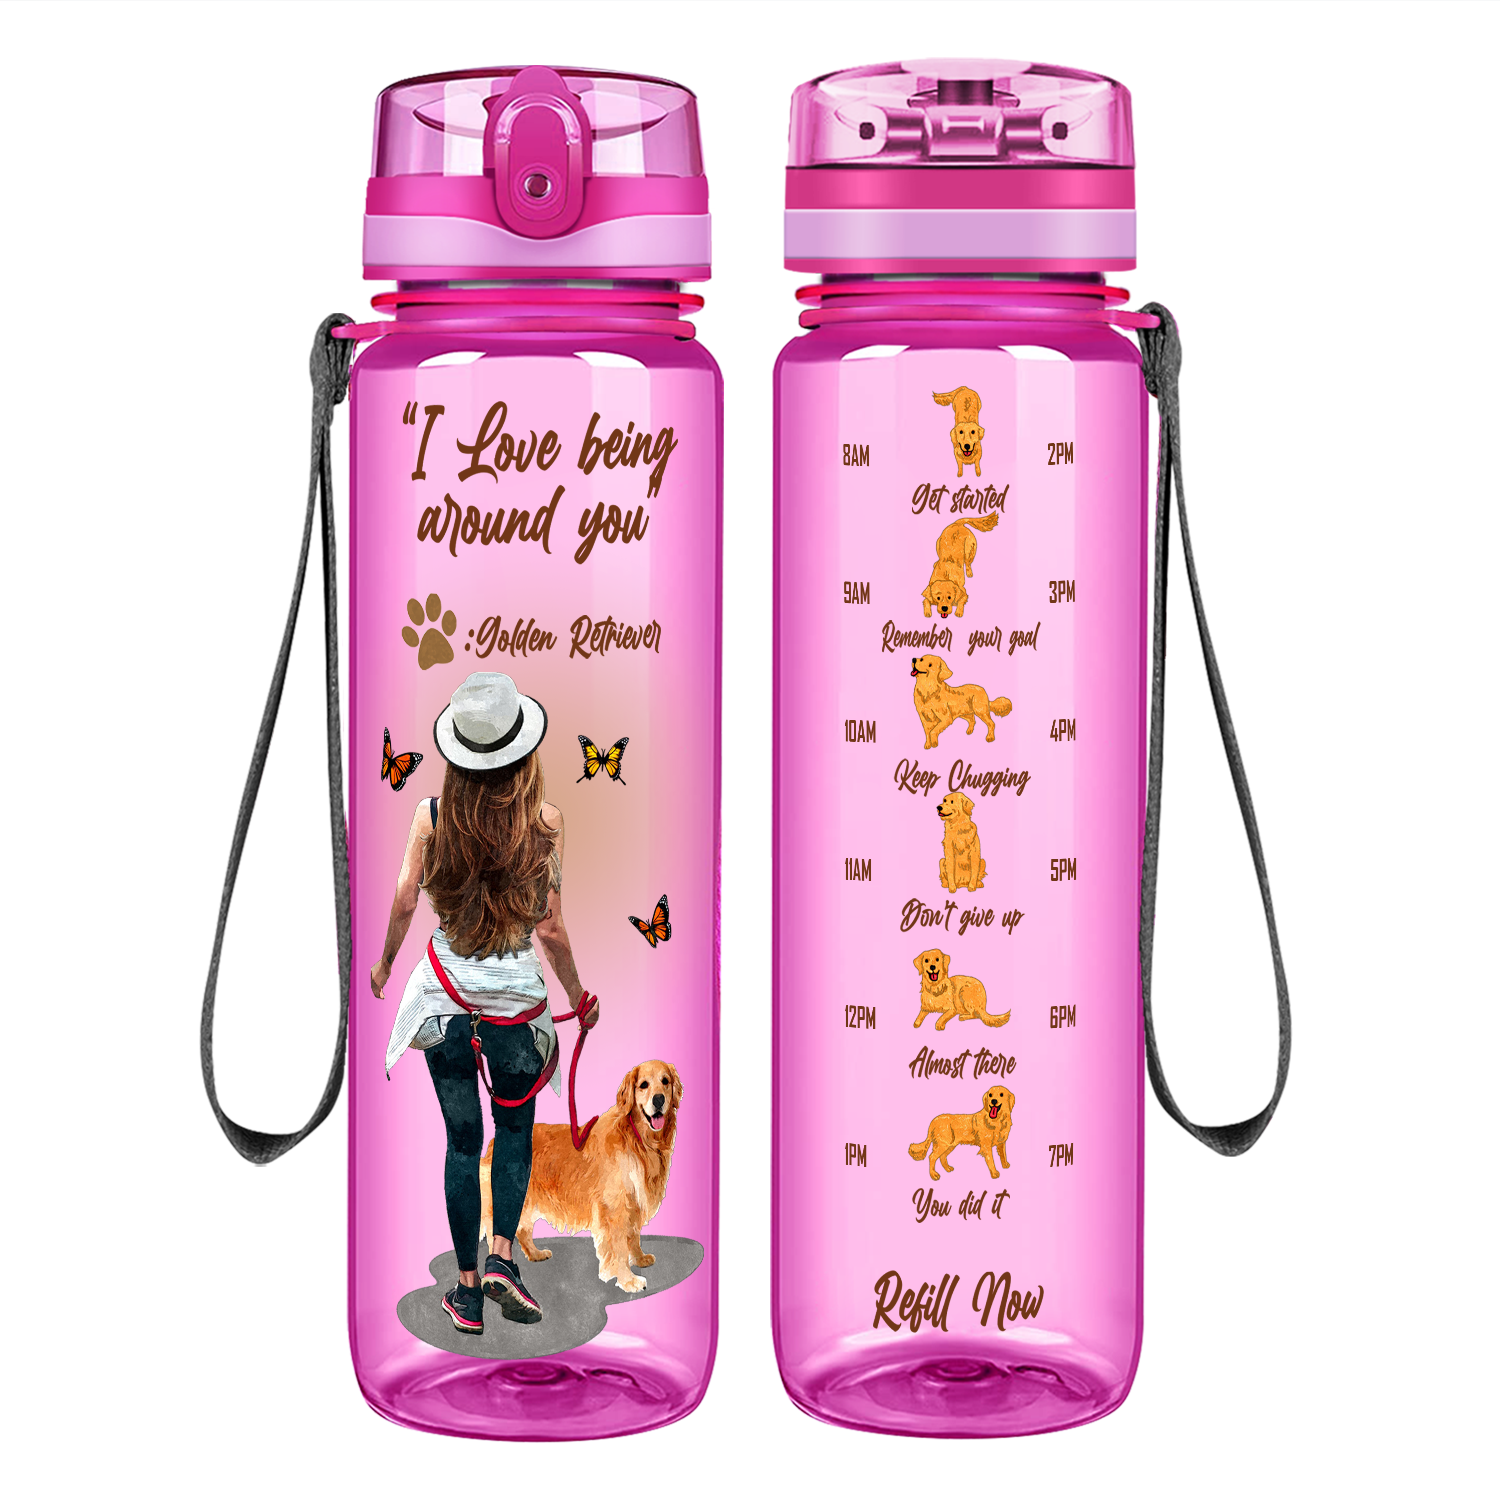 I love Being Around You Golden Retriever on 32 oz Motivational Tracking Water Bottle